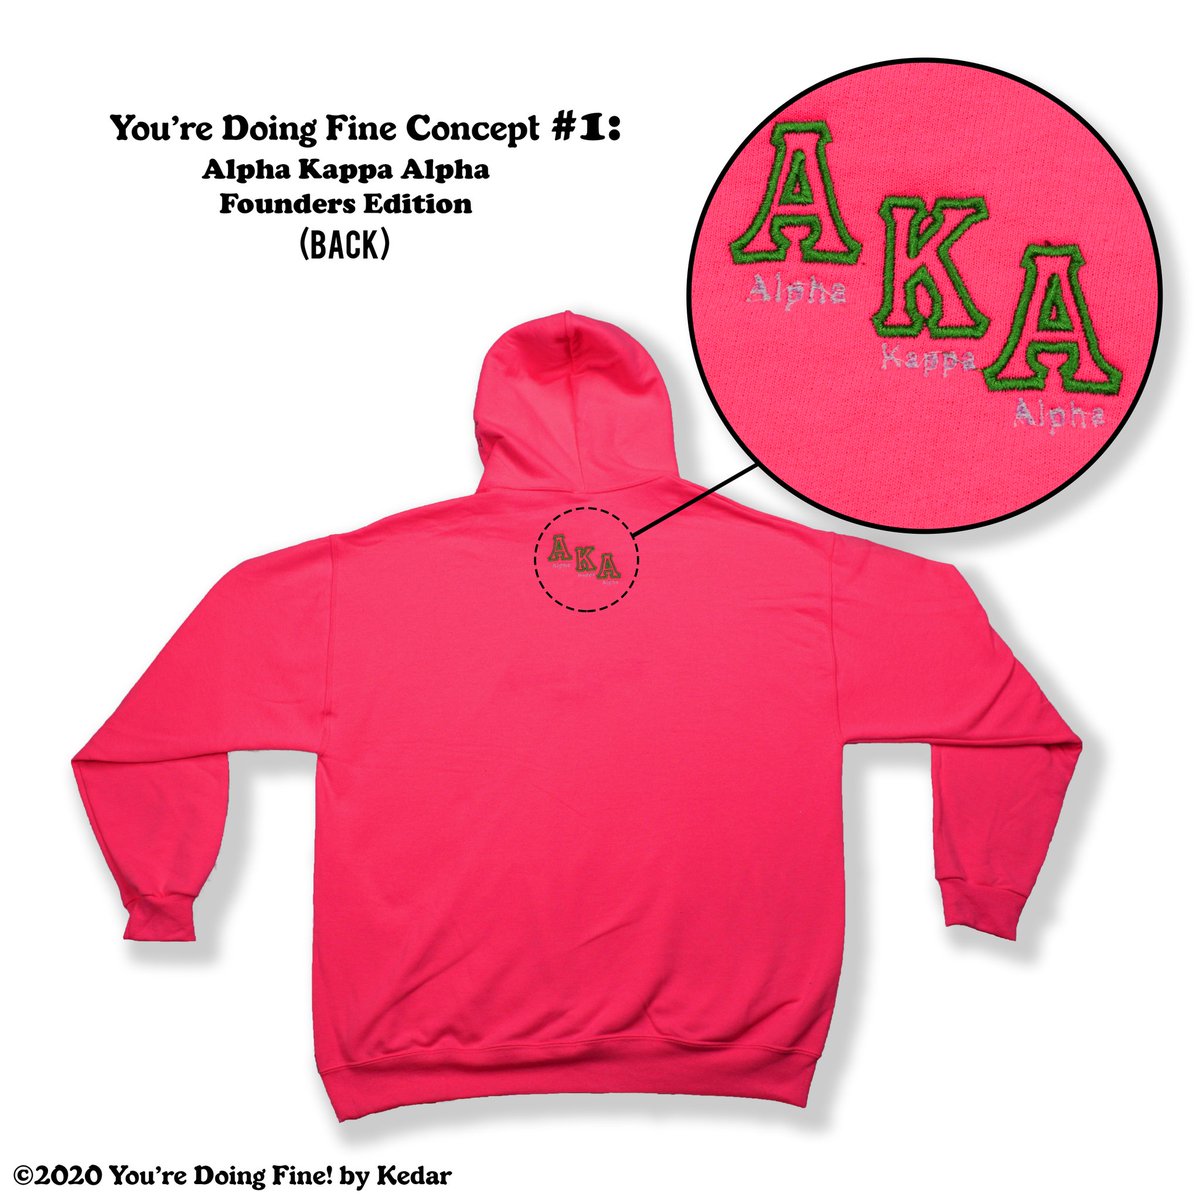 I decided to make this concept you're doing fine hoodie for fun. I wanted to see what everyone may have thought about it. I would make more if the demand calls for it but for now only one exists. 

#J15 #AKA1908 #alphakappaalpha #skeewee #akaforever #FoundersDay #J15iscoming